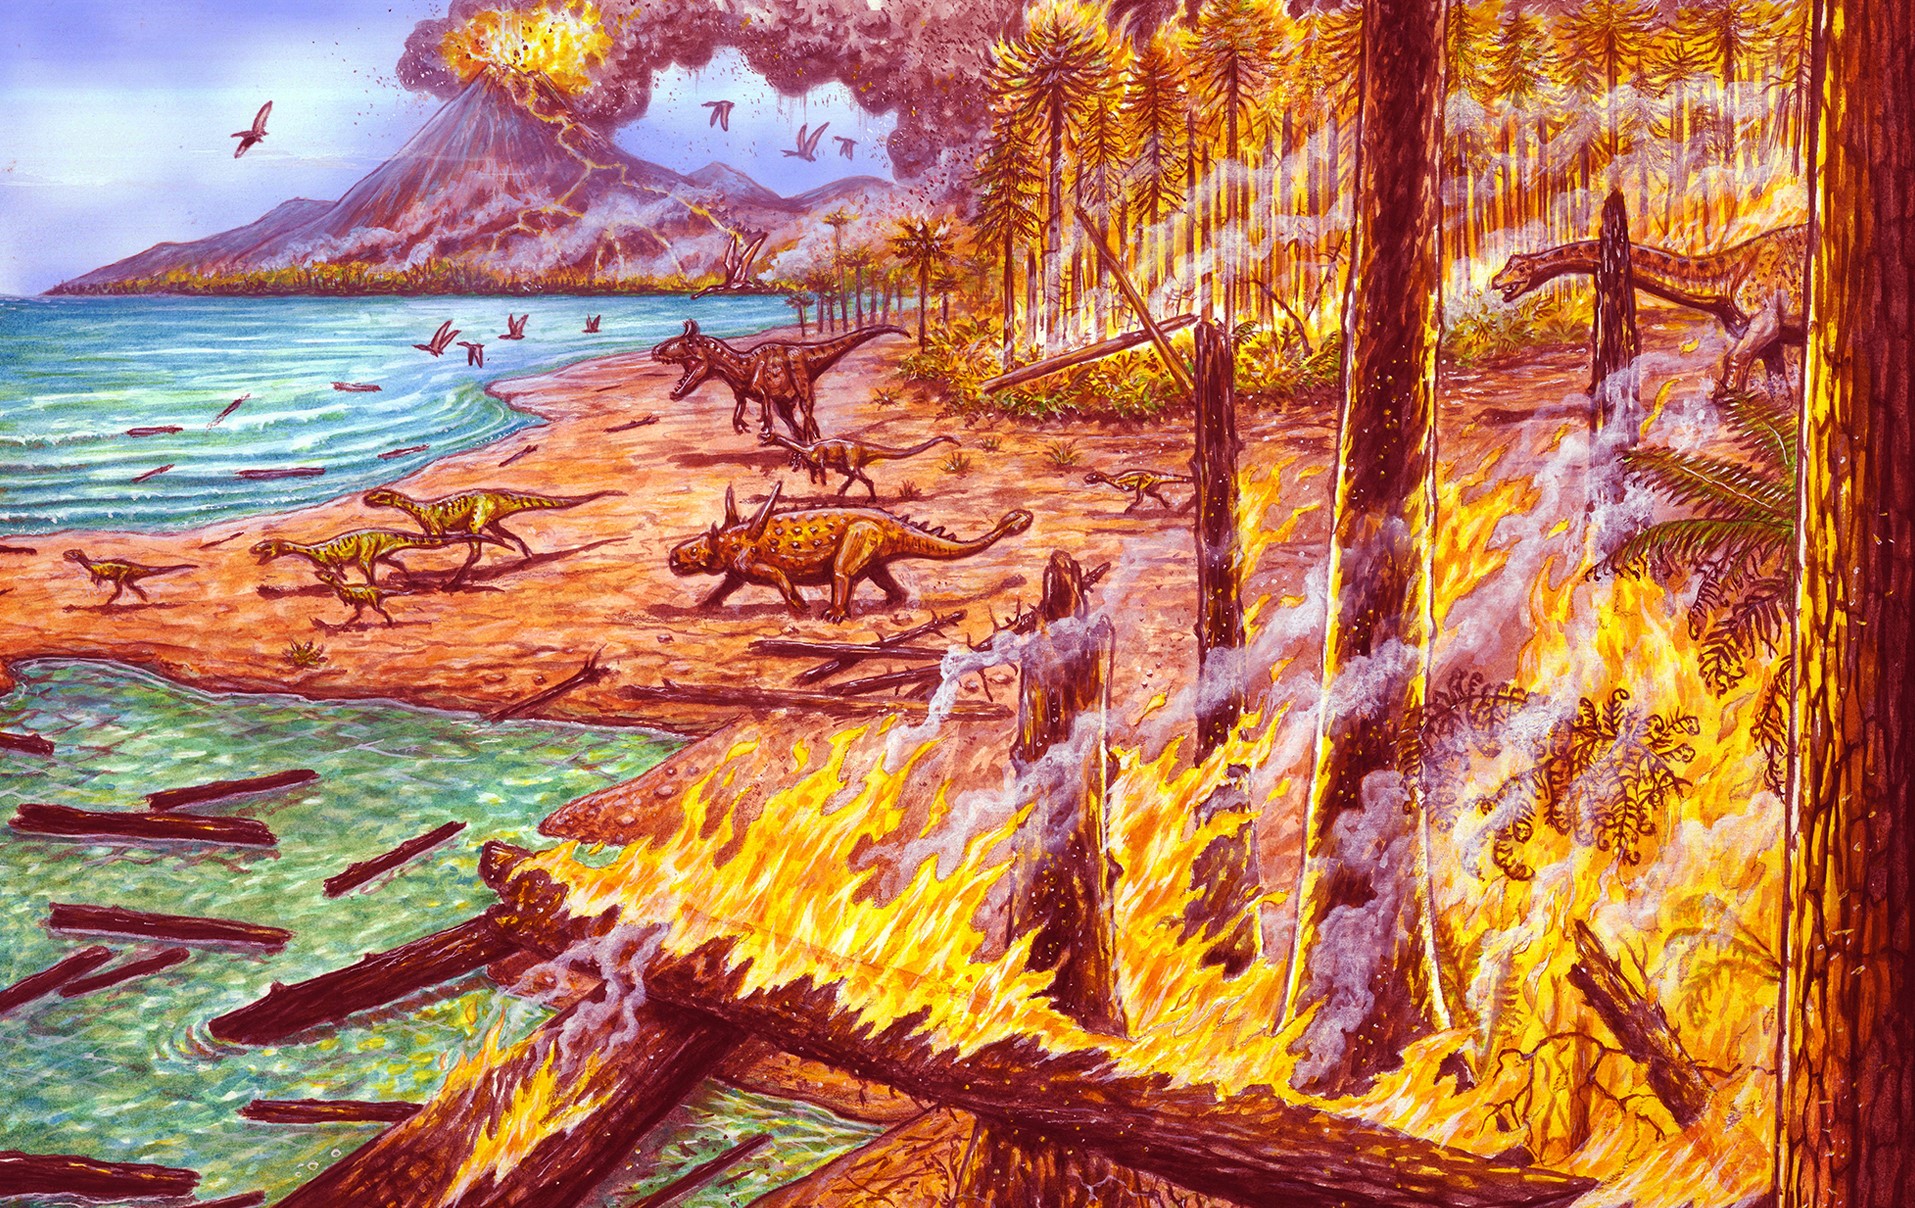 Dinosaurs escaping the wildfires in Antarctica. Credit: Illustration by Maurilio Oliveira; De Lima, F.J. et al. Polar Research (2021); CC BY 4.0)